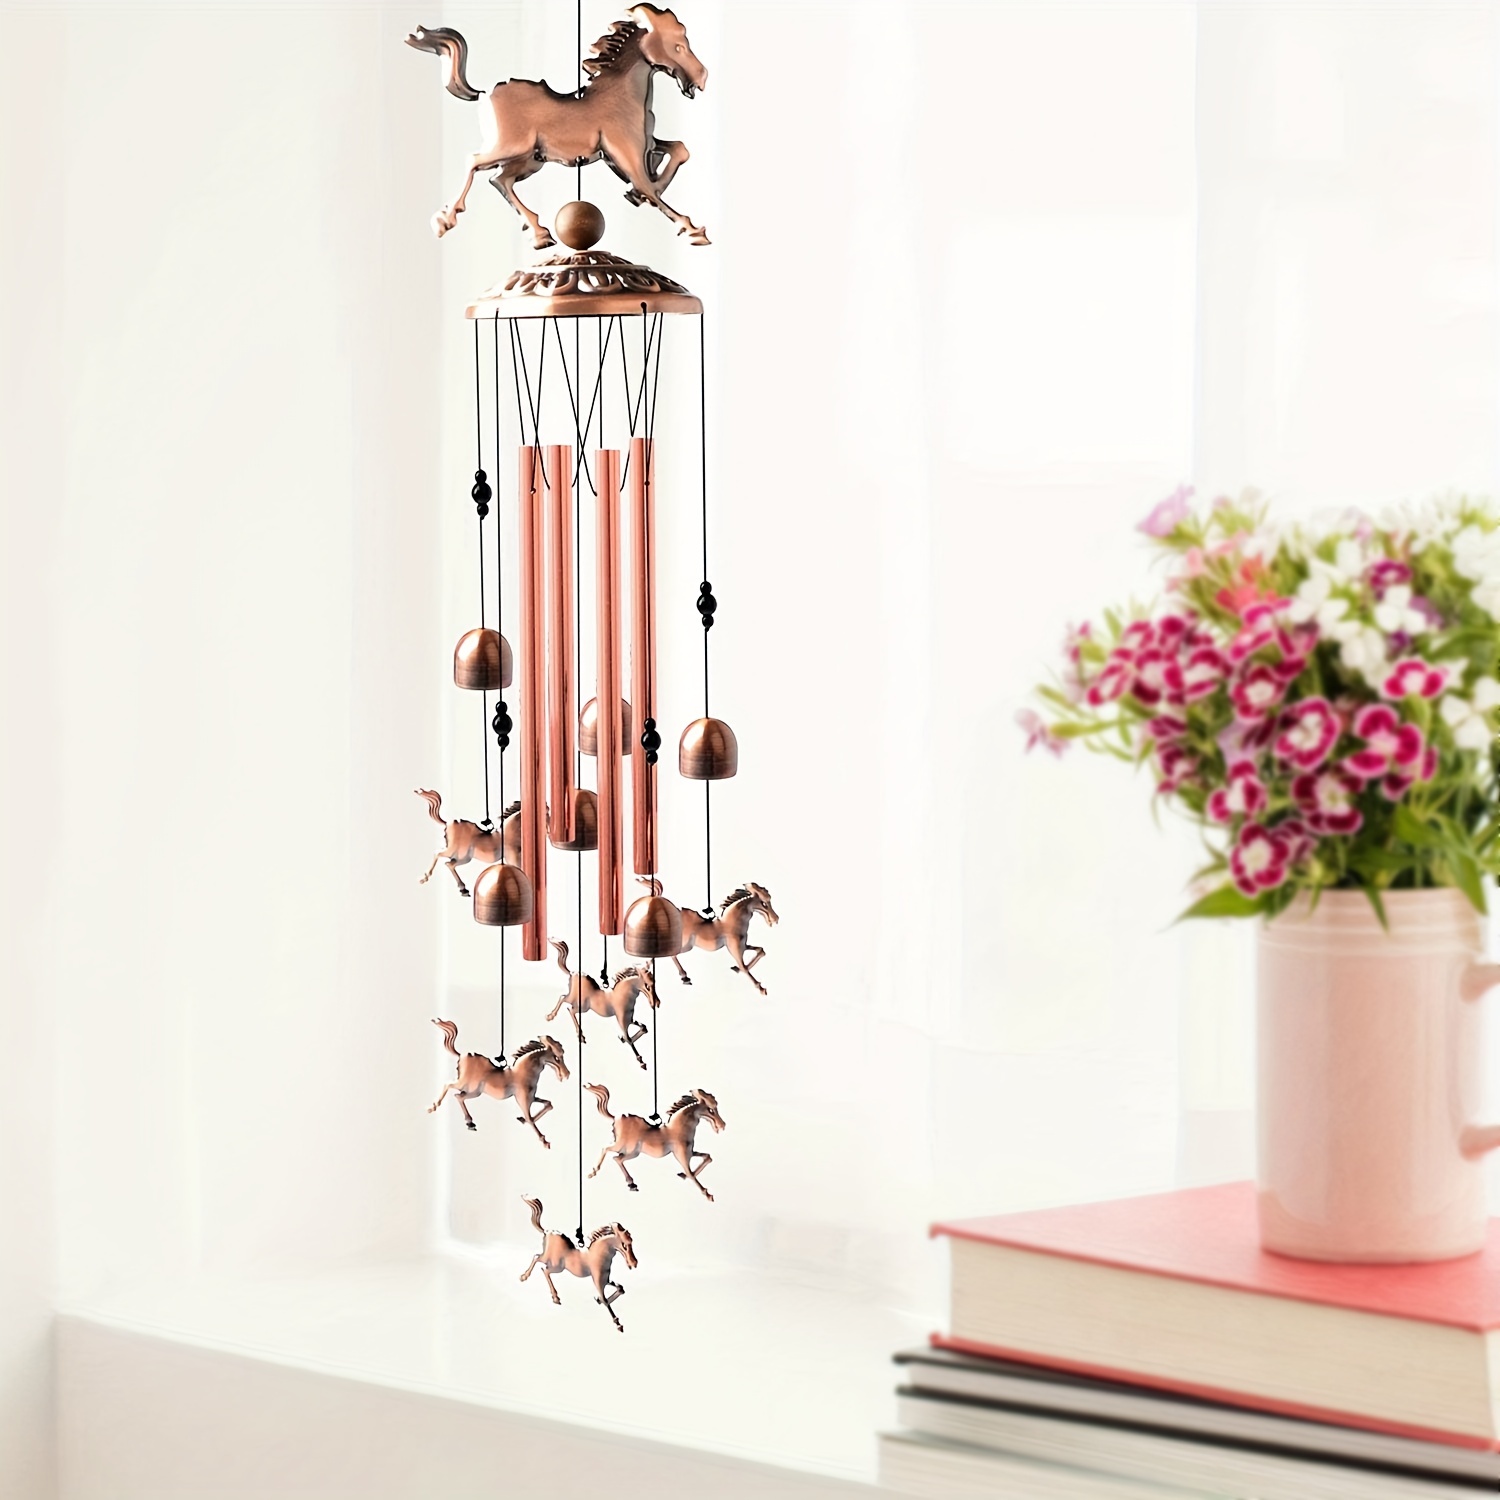 

1pc Horse Tube Wind Chime With Pendant For Garden Decor, Outdoor Decor, Creative Gift, Office Decor